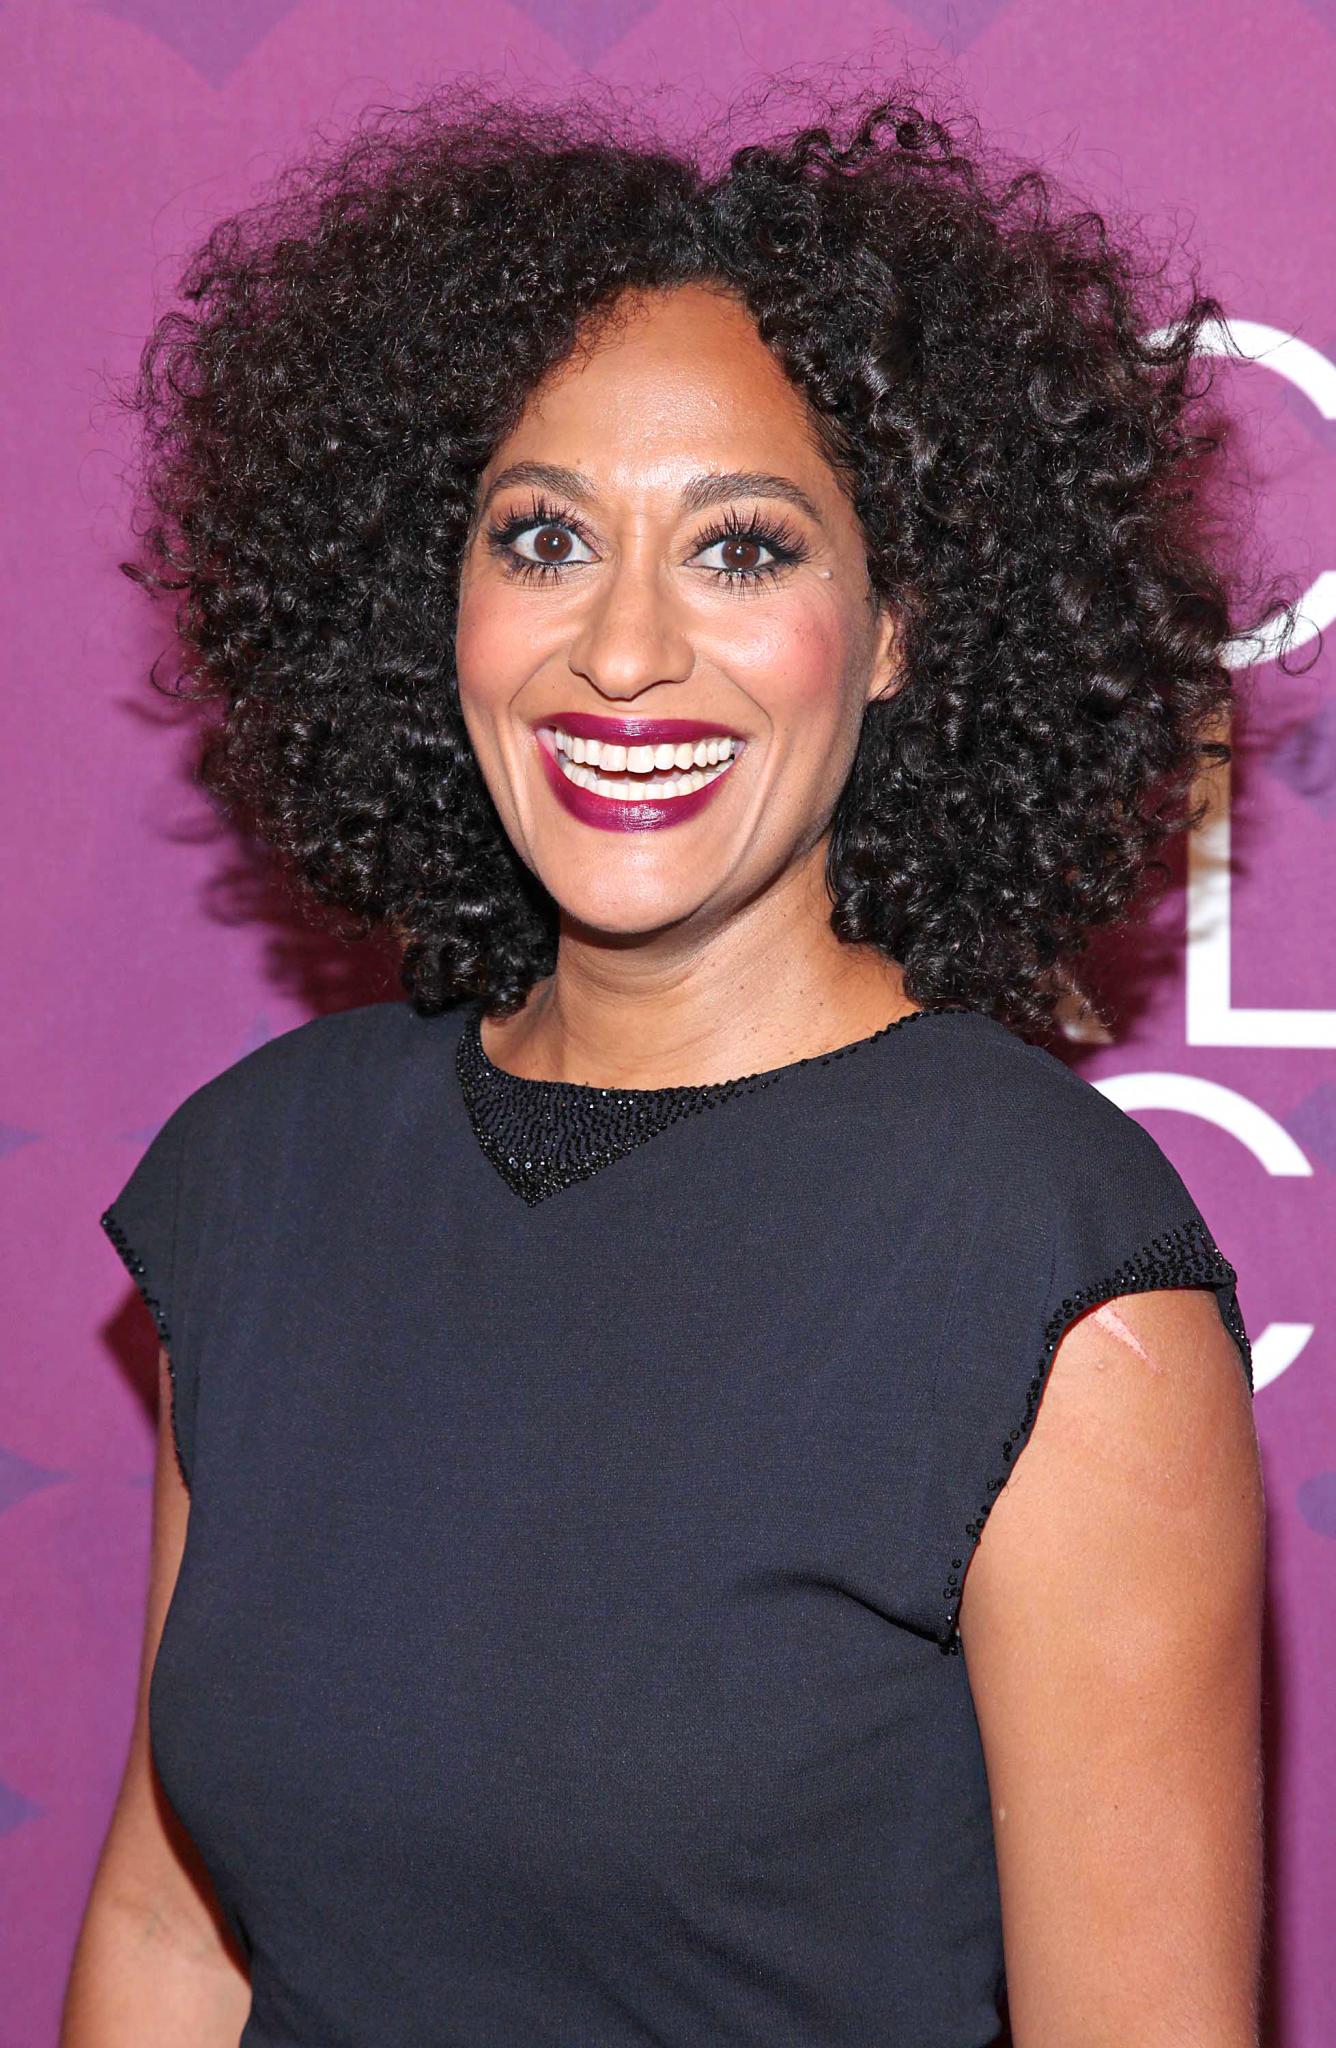 Tracee Ellis Ross Shares Hair Secrets, Weighs In on the Natural Hair Debate